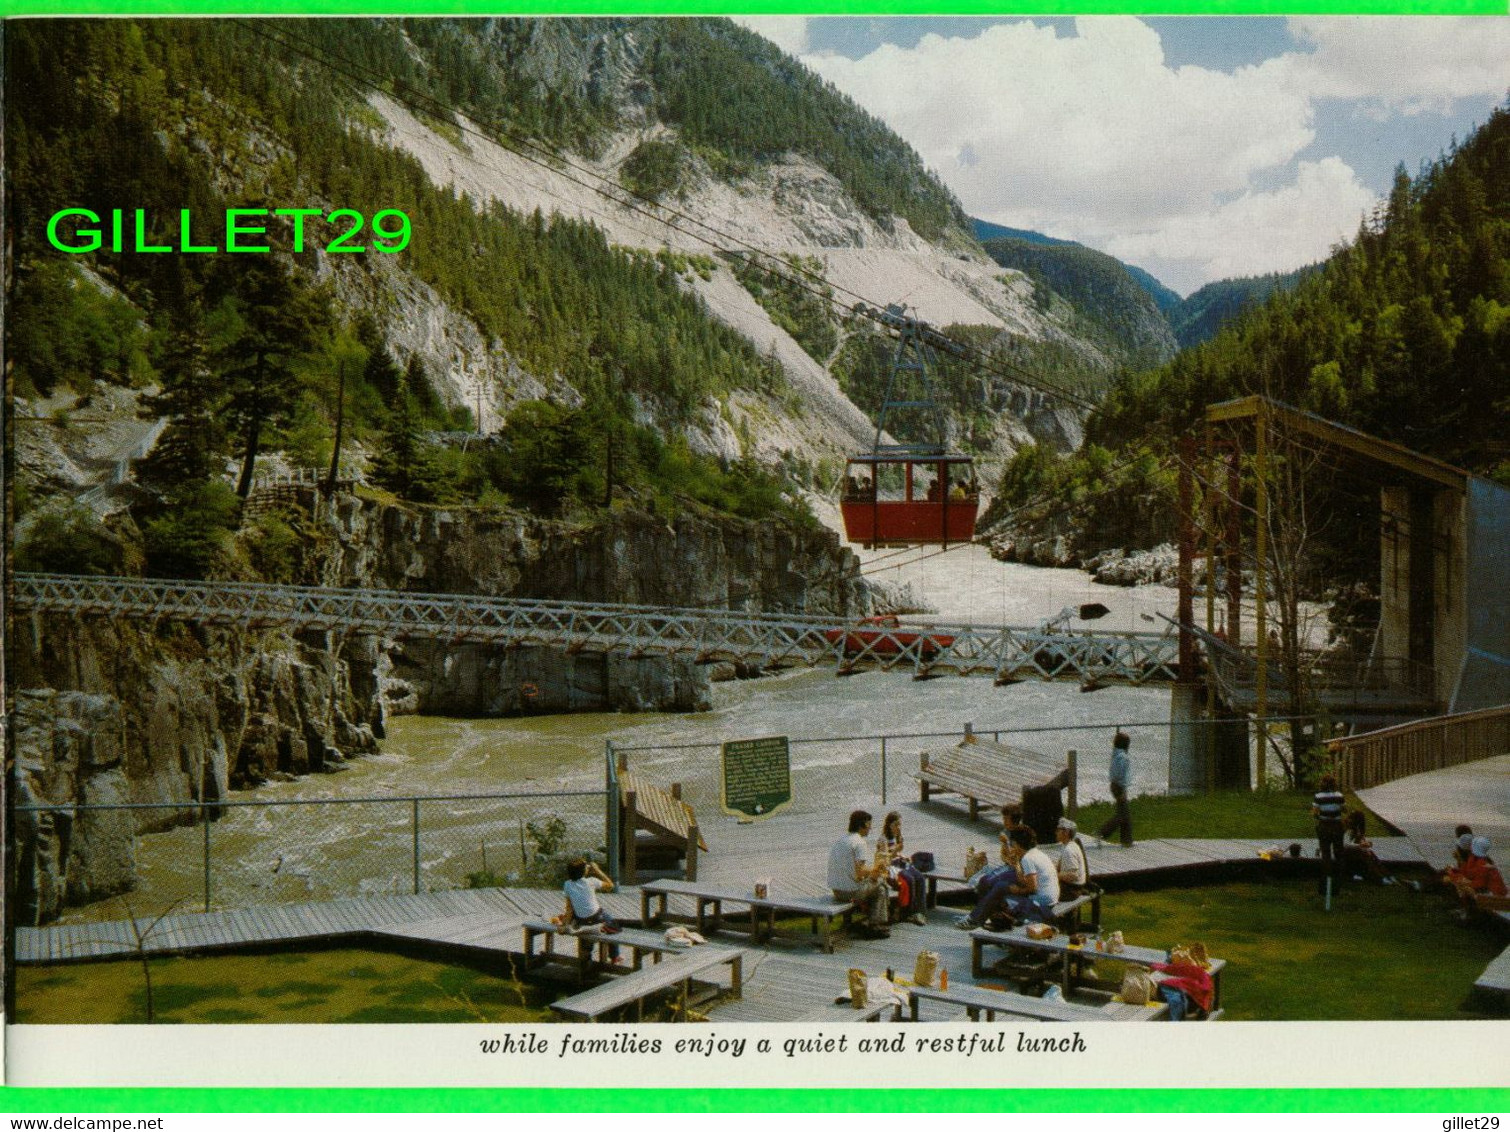 A SOUVENUR ALBUM OF HELL'S GATE AIRTRAM, FRASER CANYON, BC IN 1978 - 20 PAGES - - América Del Norte